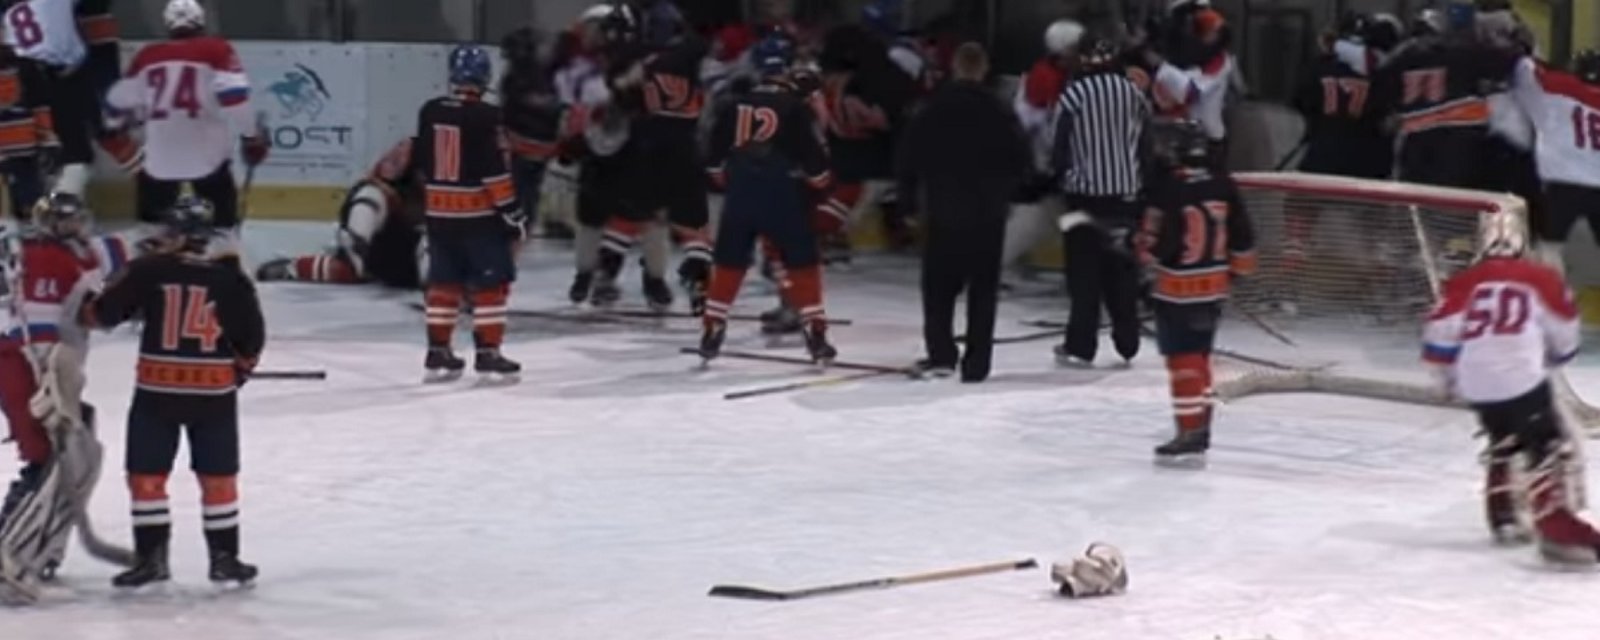 Referee attacked in insane bench clearing brawl.